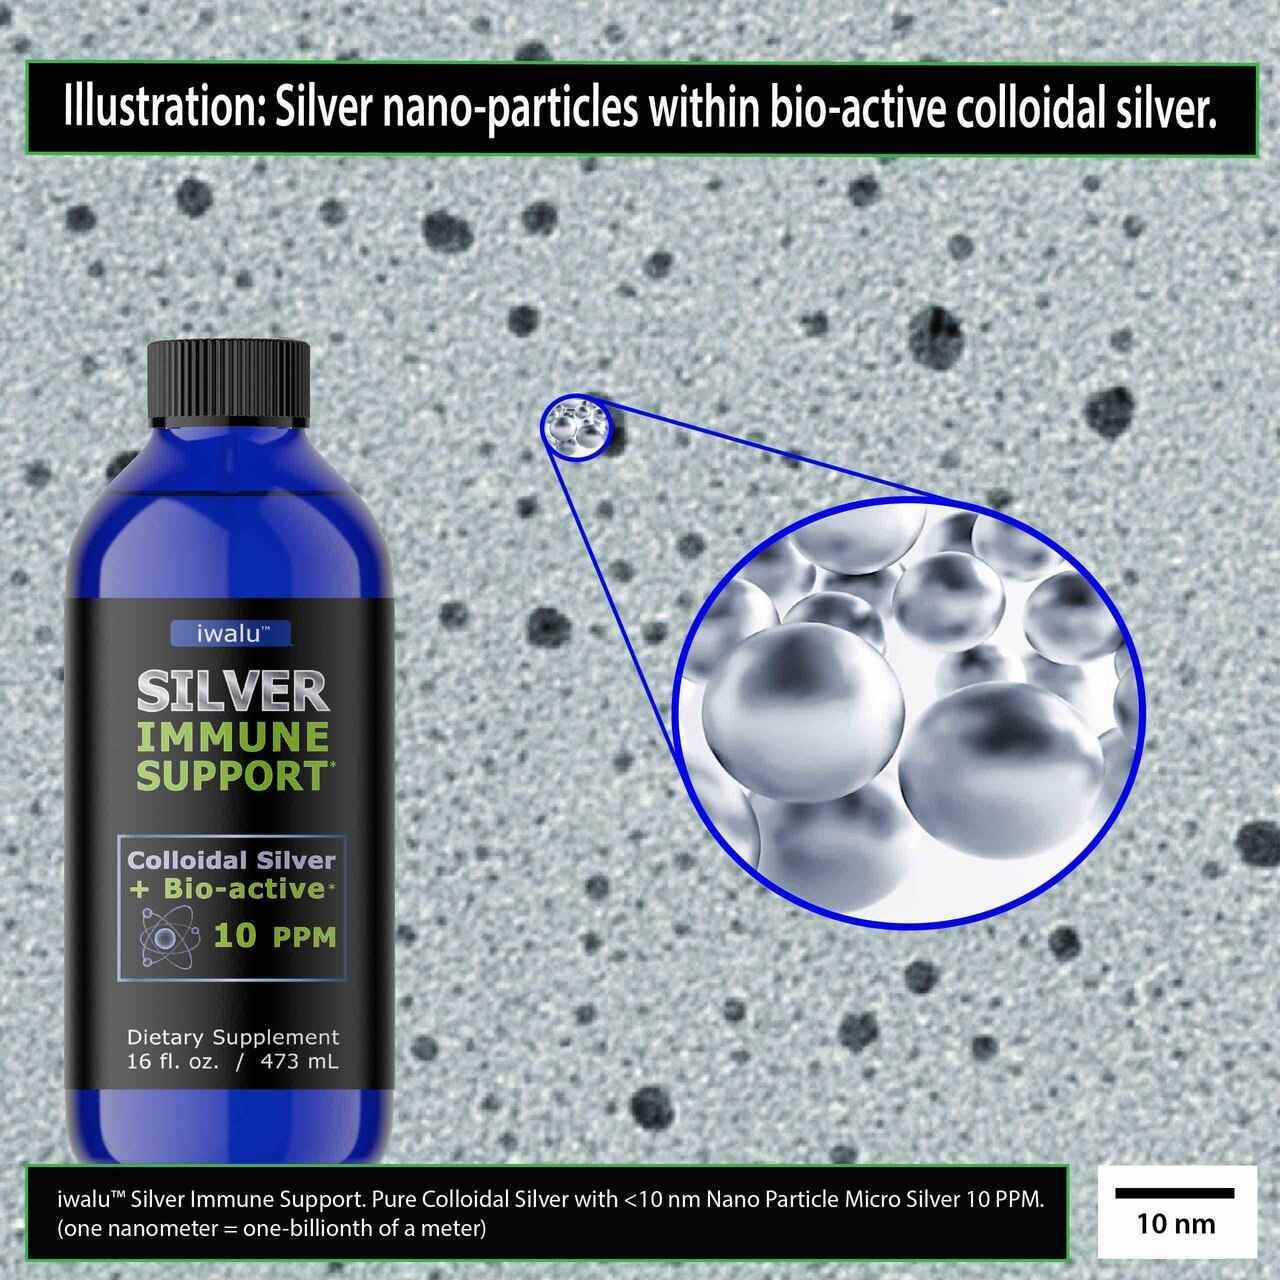 iwalu iwalu Colloidal Silver Liquid Immune Support Nano Silver Water Immunity Support or Silver Water Colloidal Silver Spray or Bioactive Silver Solution or Dog and Cat Safe or Adults Kids Immune Booster 8 Oz